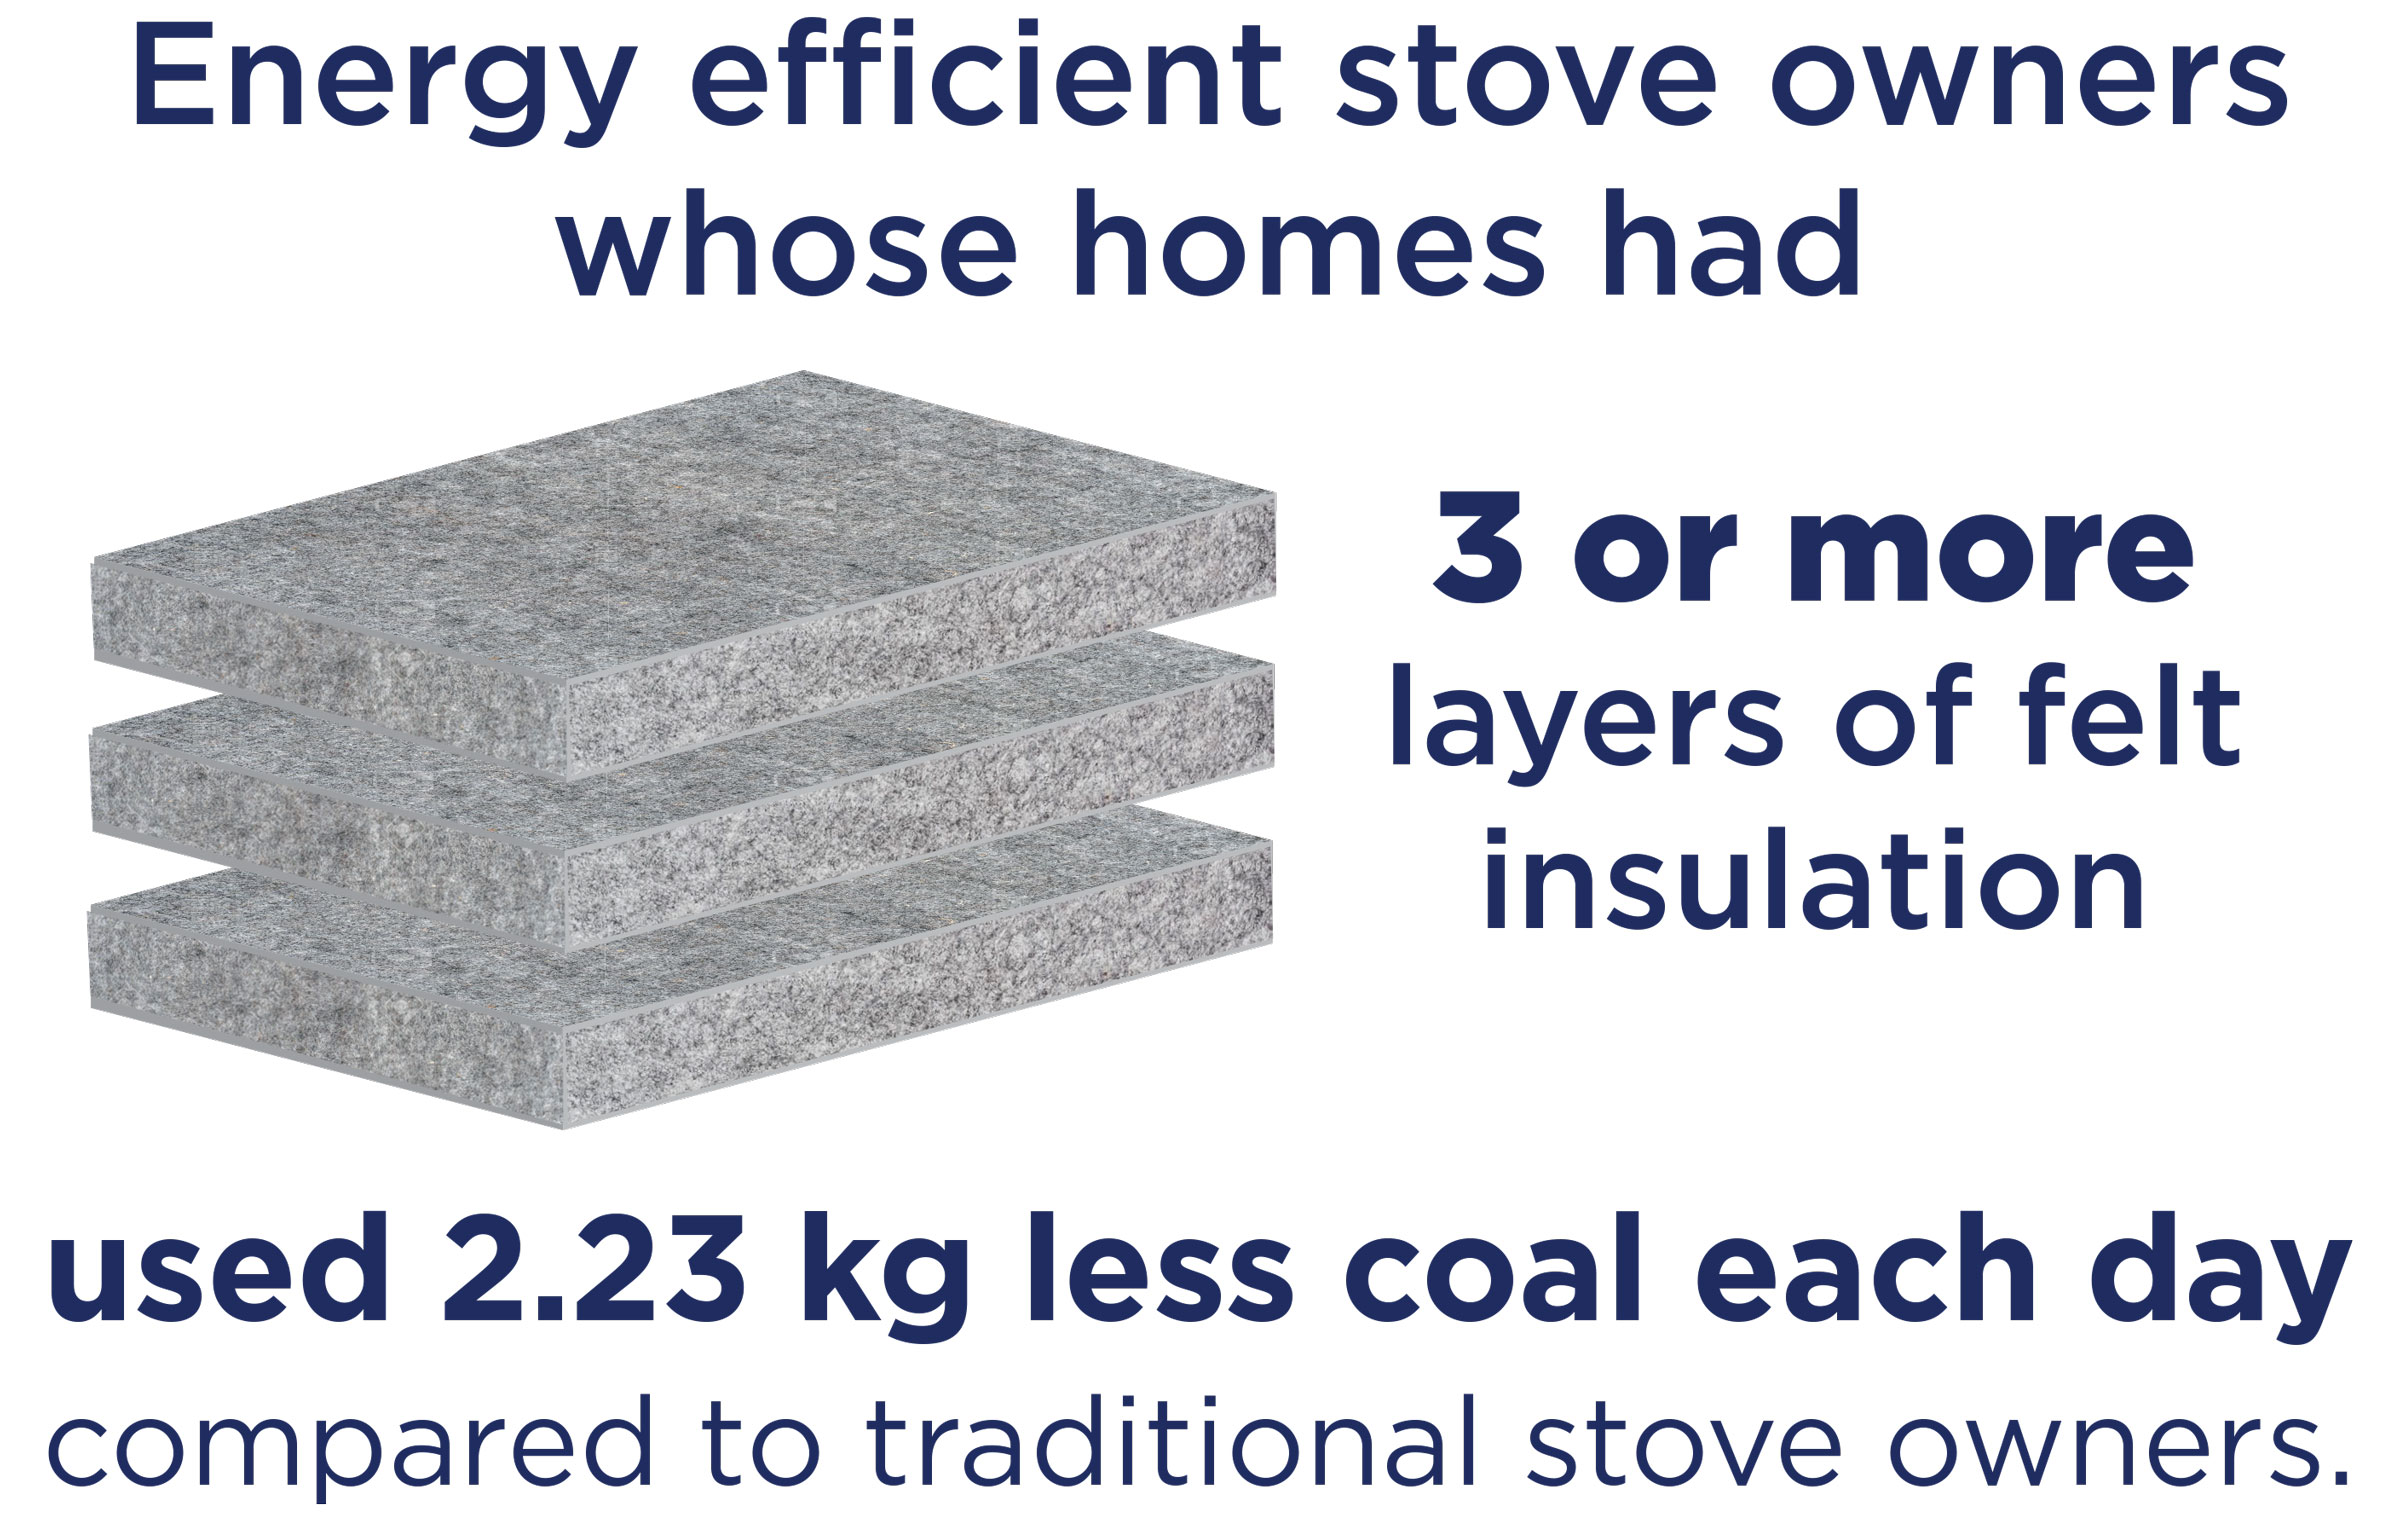 Energy effcient stove owners whose homes had 3 or more layers of felt insulation used 2.23 kg less coal each day.